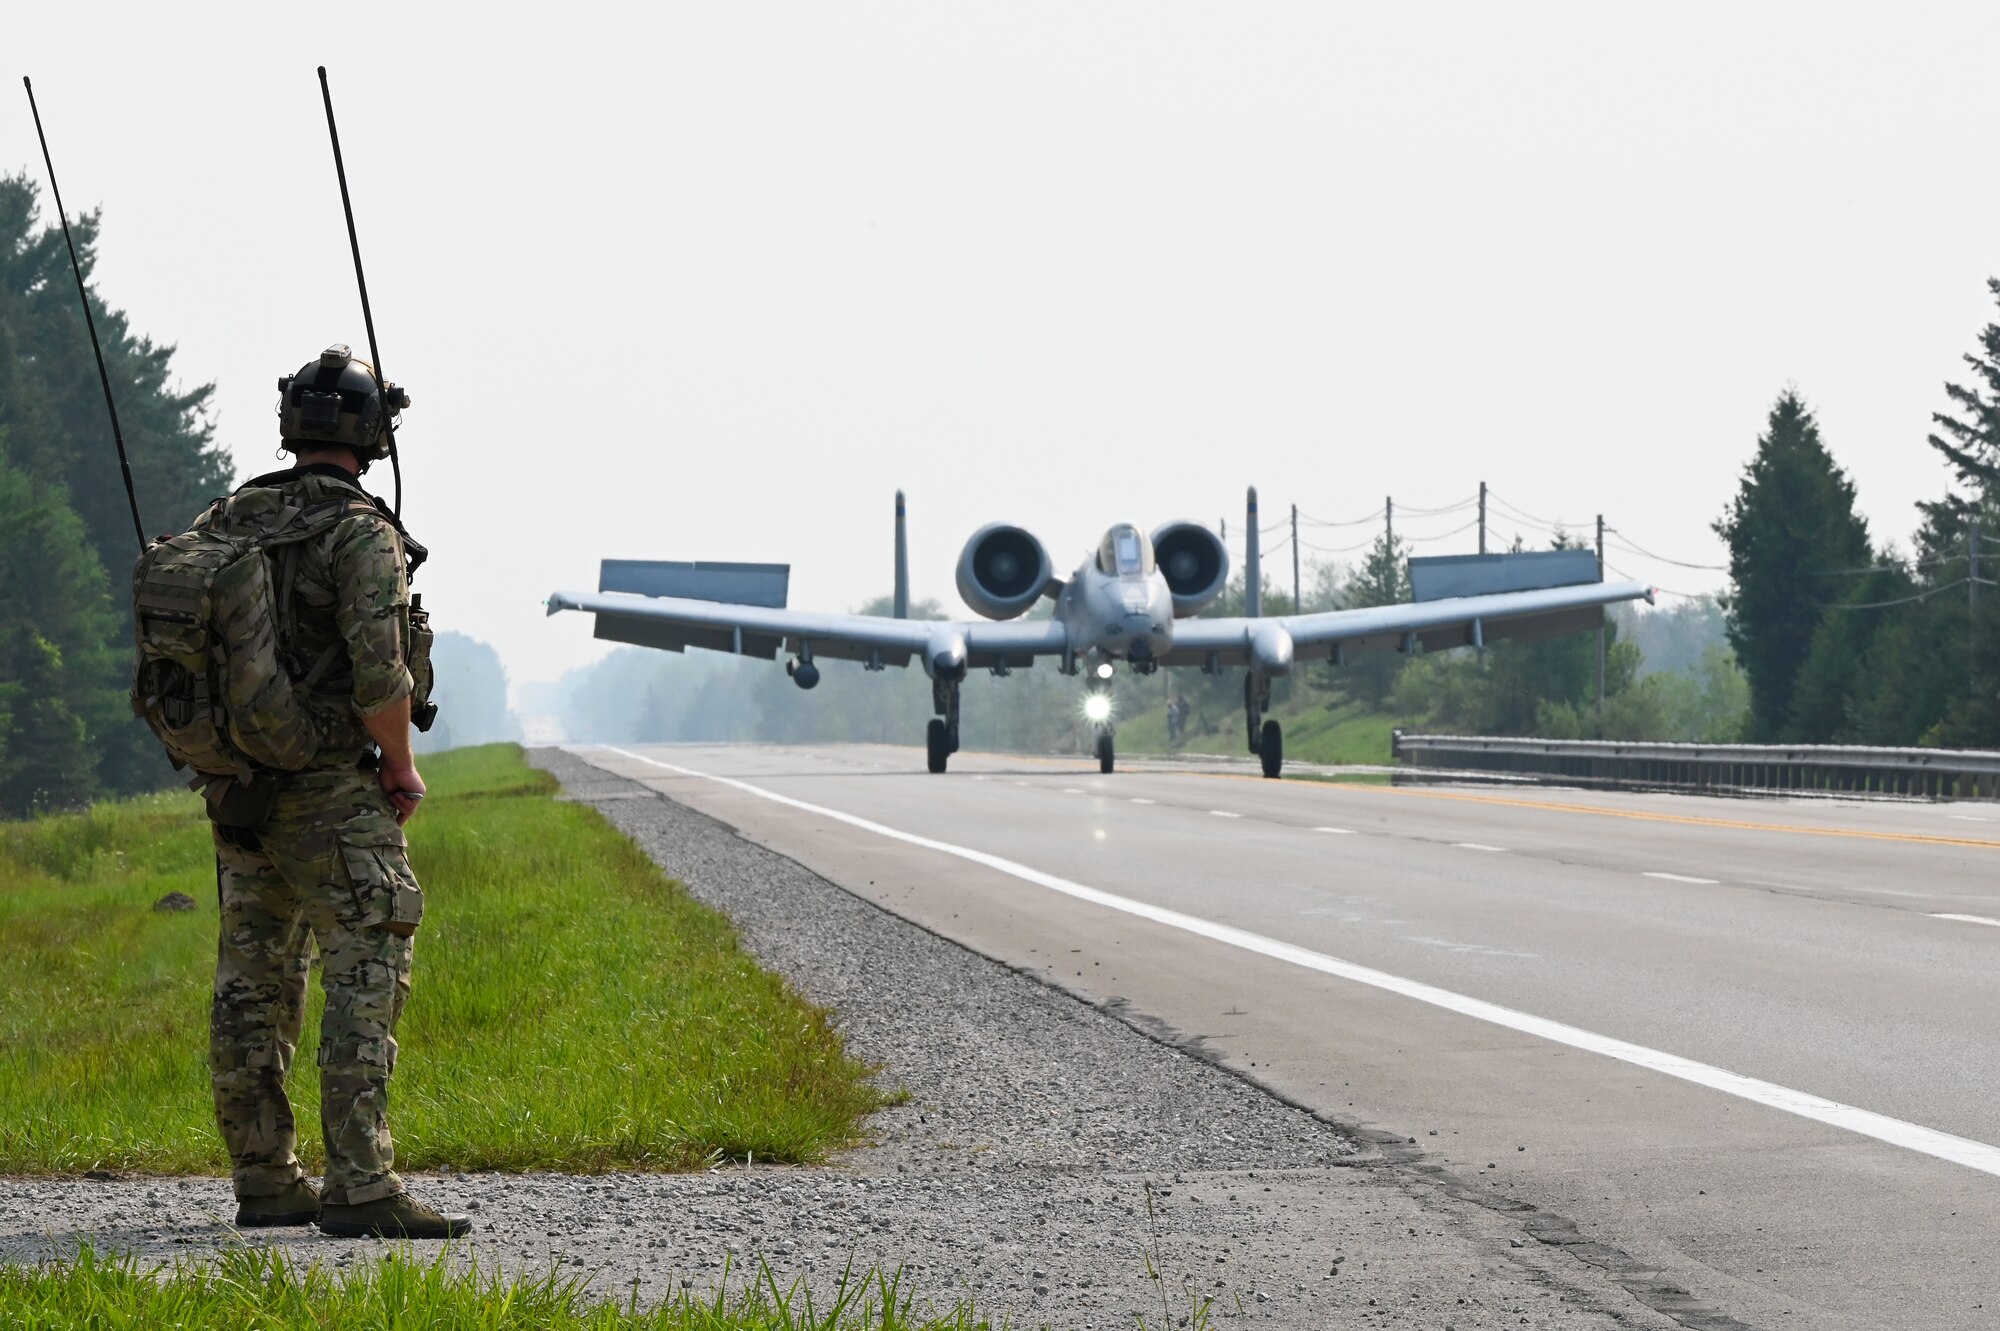 A special tactics operator from the 24th Special Operations Wing guides an A-10 Thunderbolt II from the Michigan Air National Guard’s 127th Wing as it lands on a closed public highway Aug. 5, 2021 at Alpena, Mich., as part of a training exercise during Northern Strike 21. This is the first time in history that the Air Force has purposely landed modern aircraft on a civilian roadway in the U.S. The joint training event tested part of the agile employment concept, focusing on projecting combat power from austere locations. (U.S. Air Force photo by Staff Sgt. Ridge Shan)